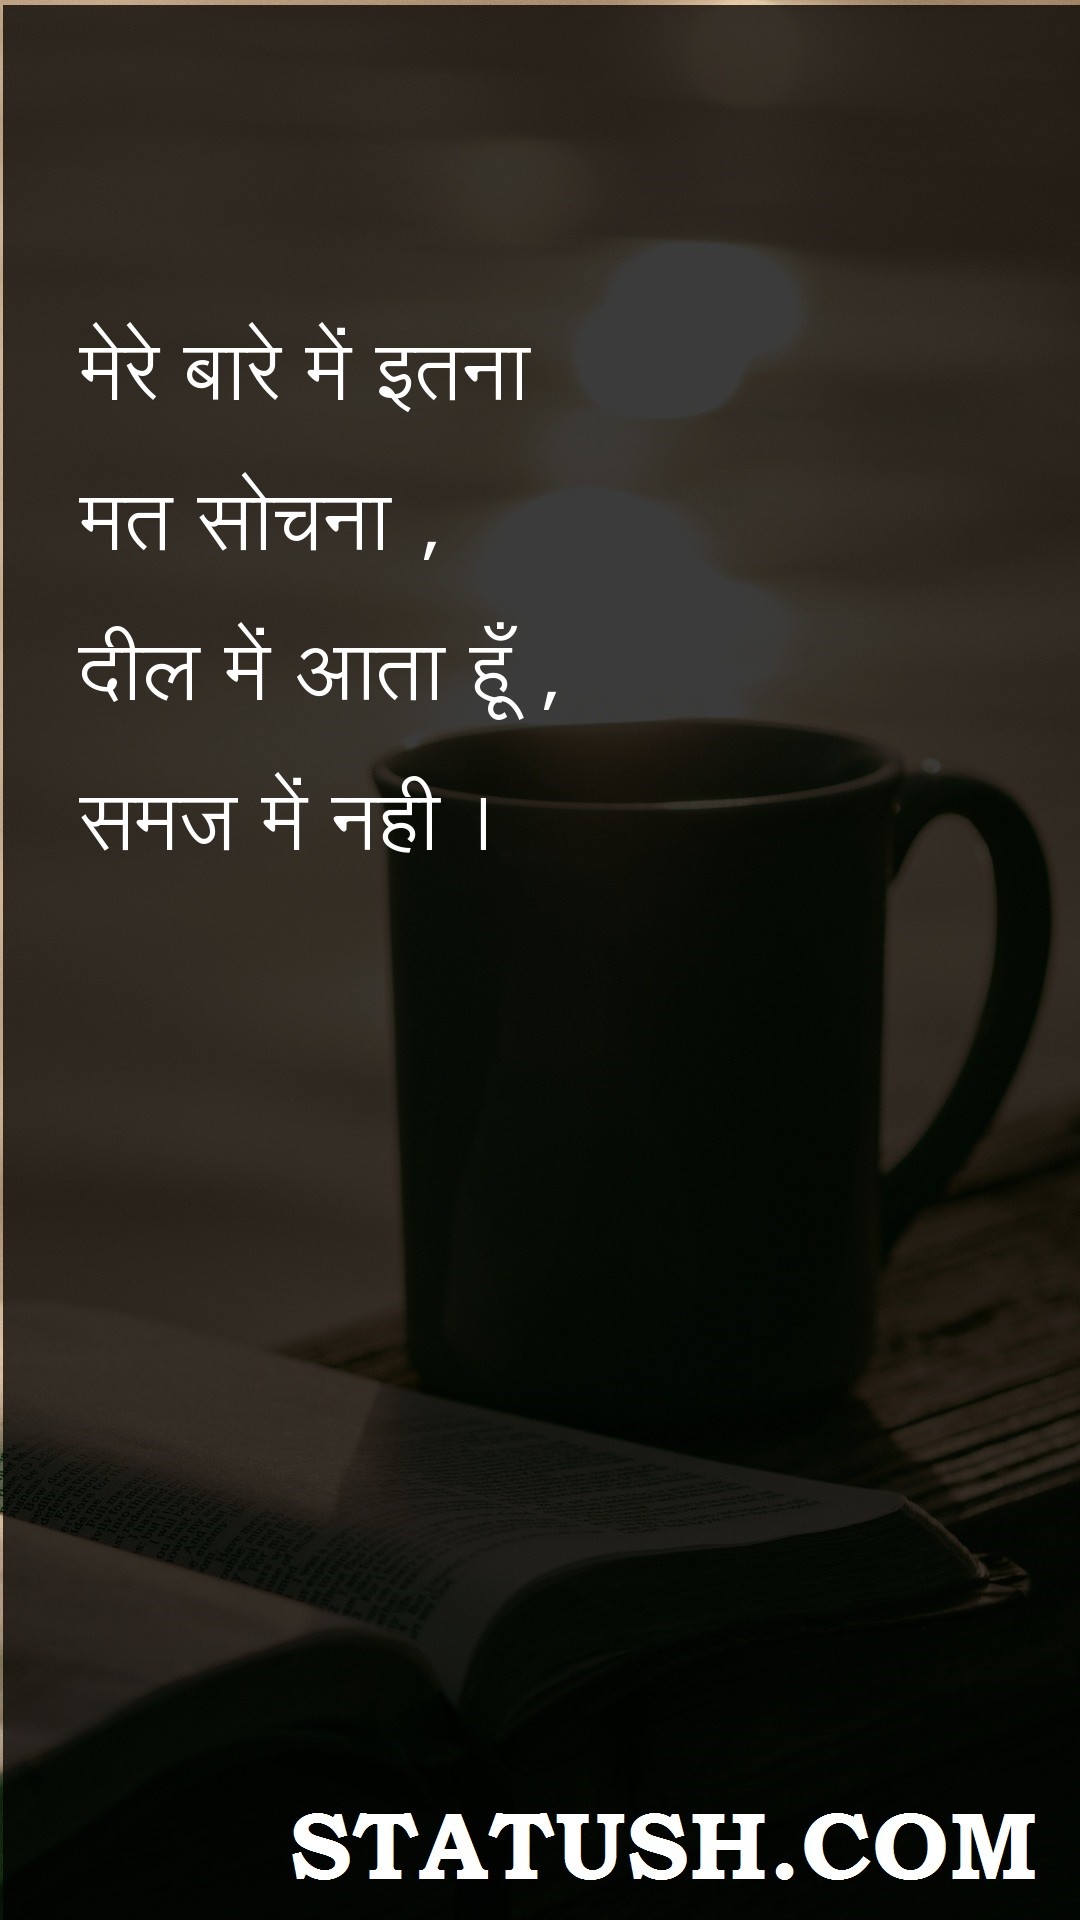 I come in the heart - Hindi Quotes at statush.com